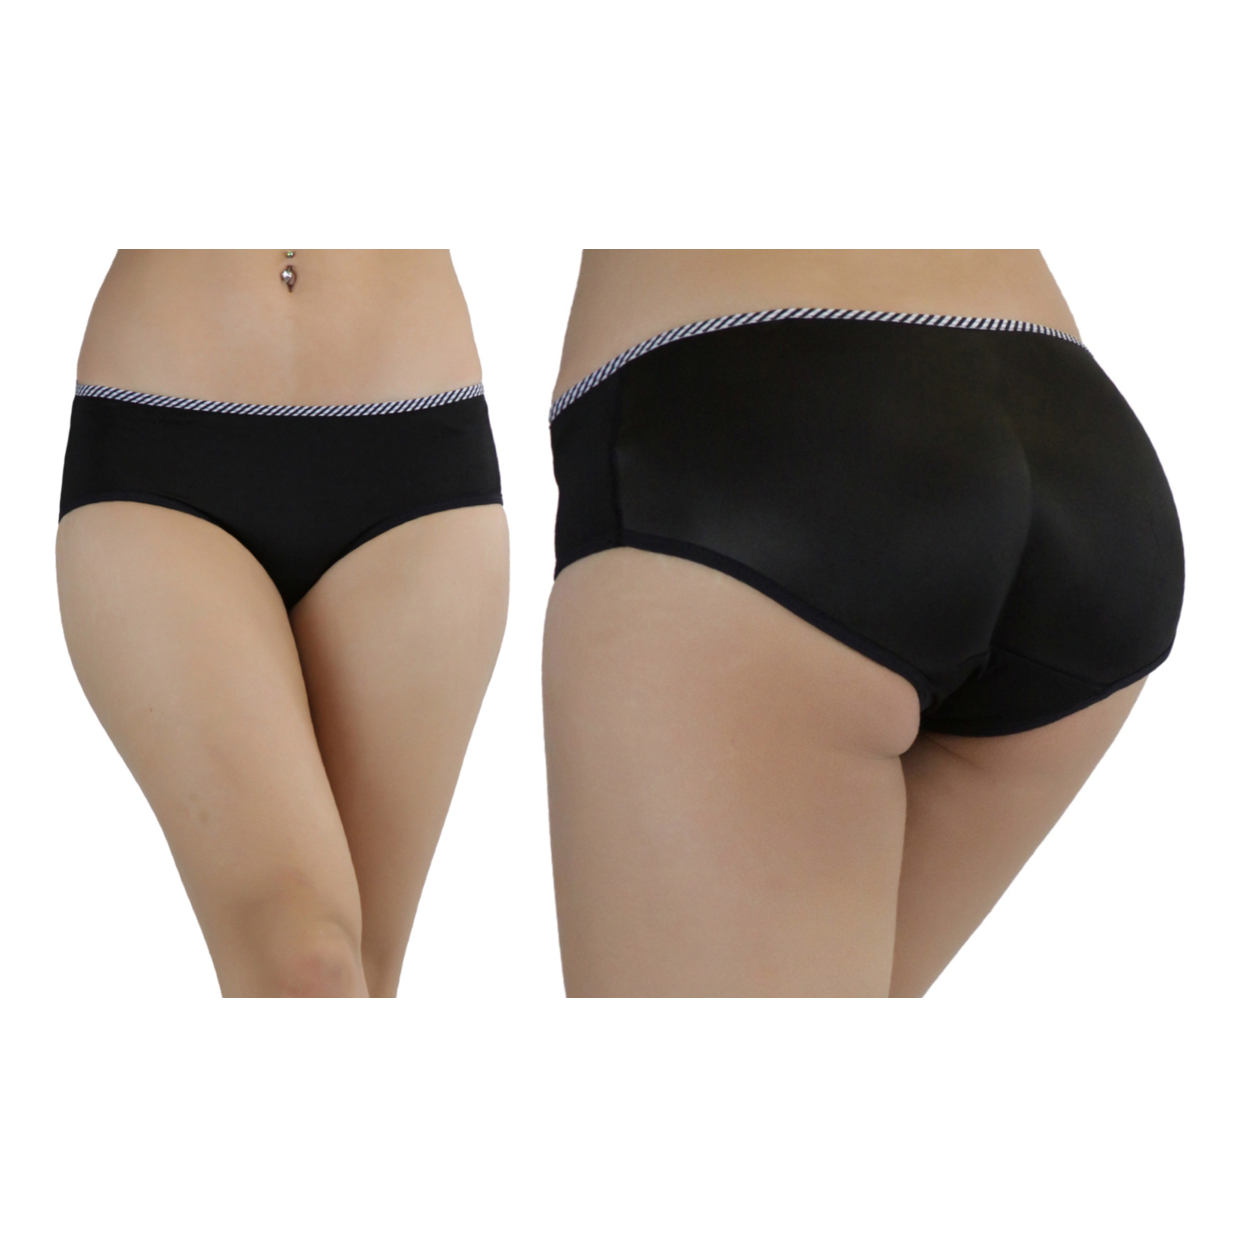 Women's Instant Booty Boosters Padded Panty - Beige, XS